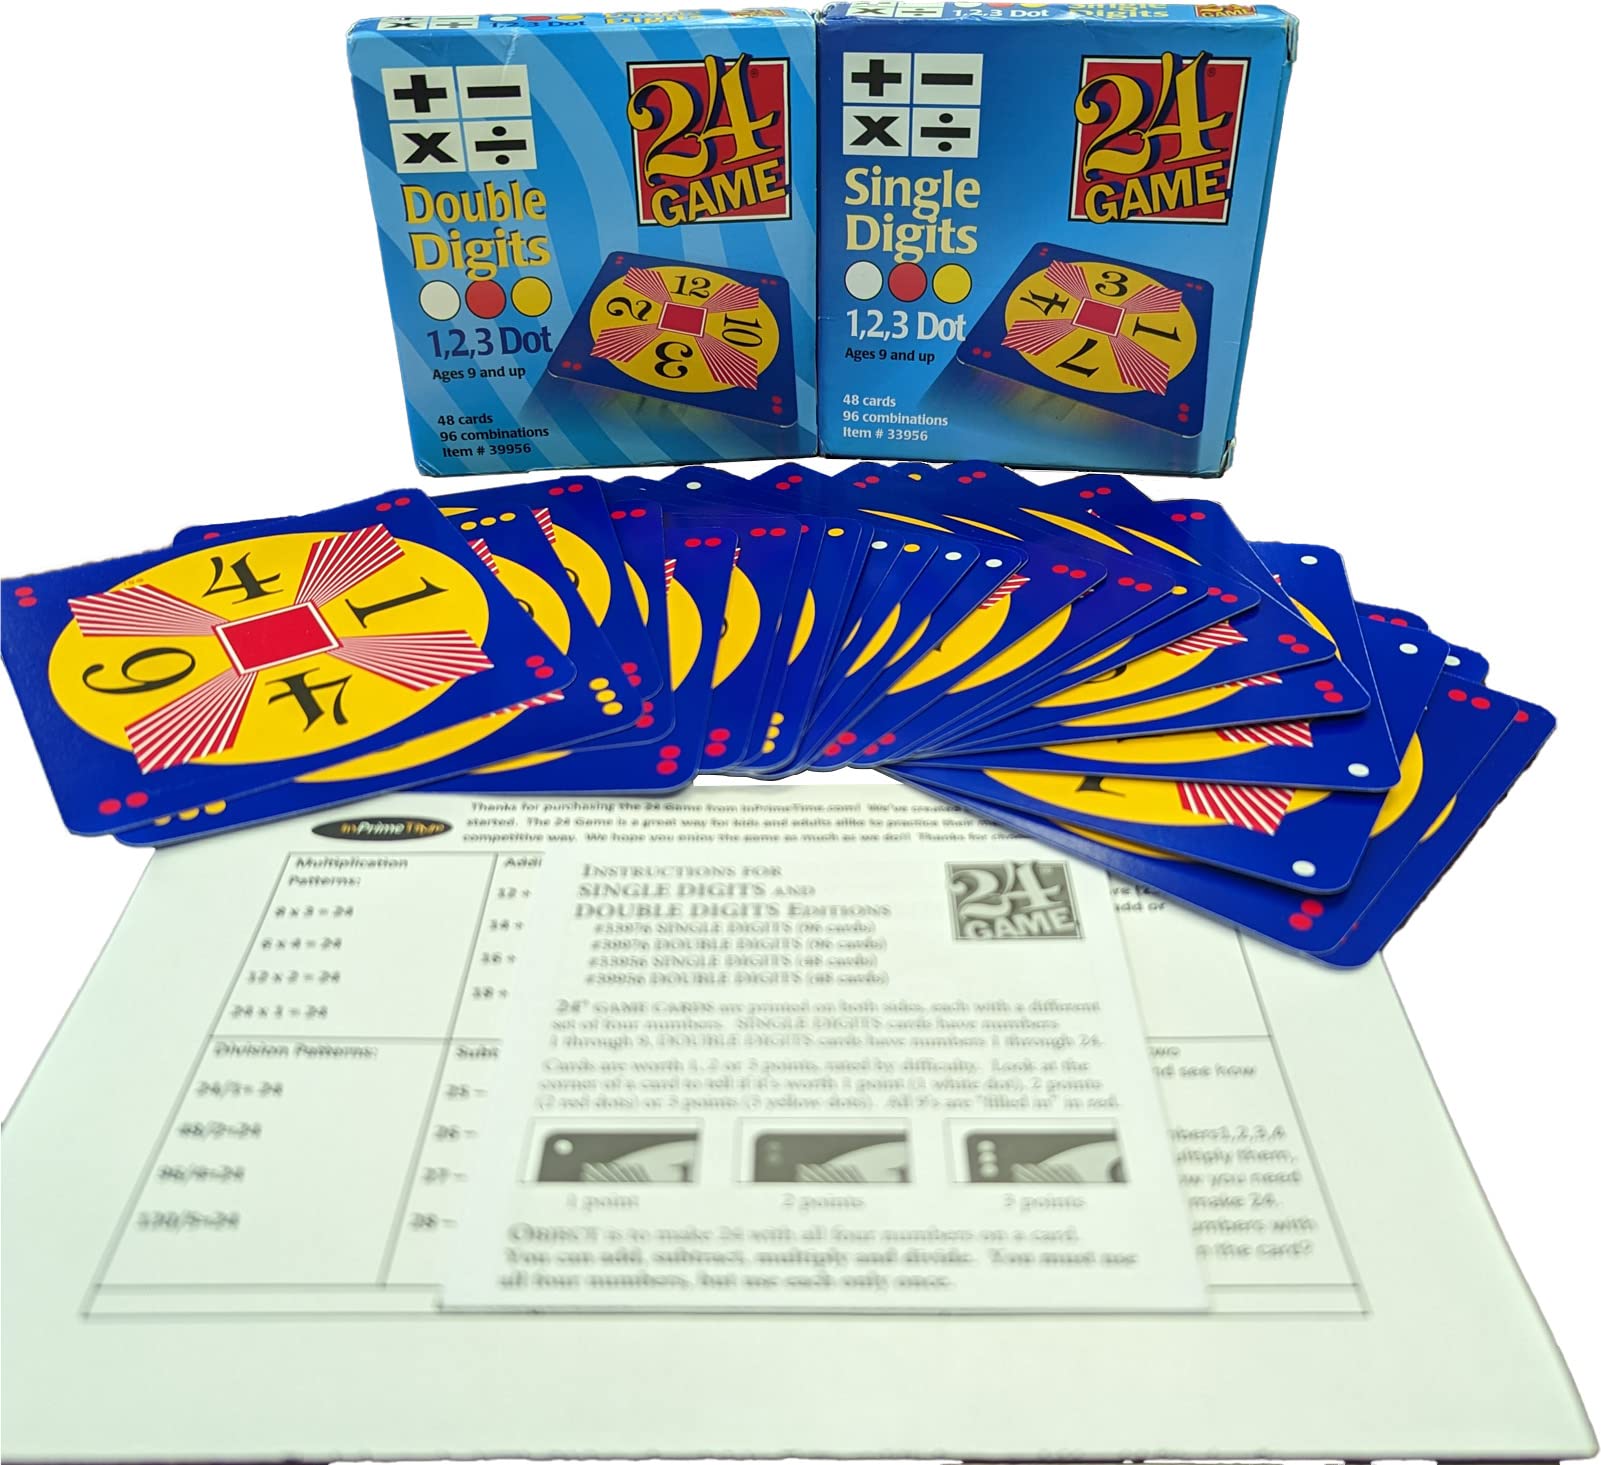 24 Game Two Pack: Includes 48 Single Digit Cards and 48 Double Digit Cards and Exclusive Tips Sheet!